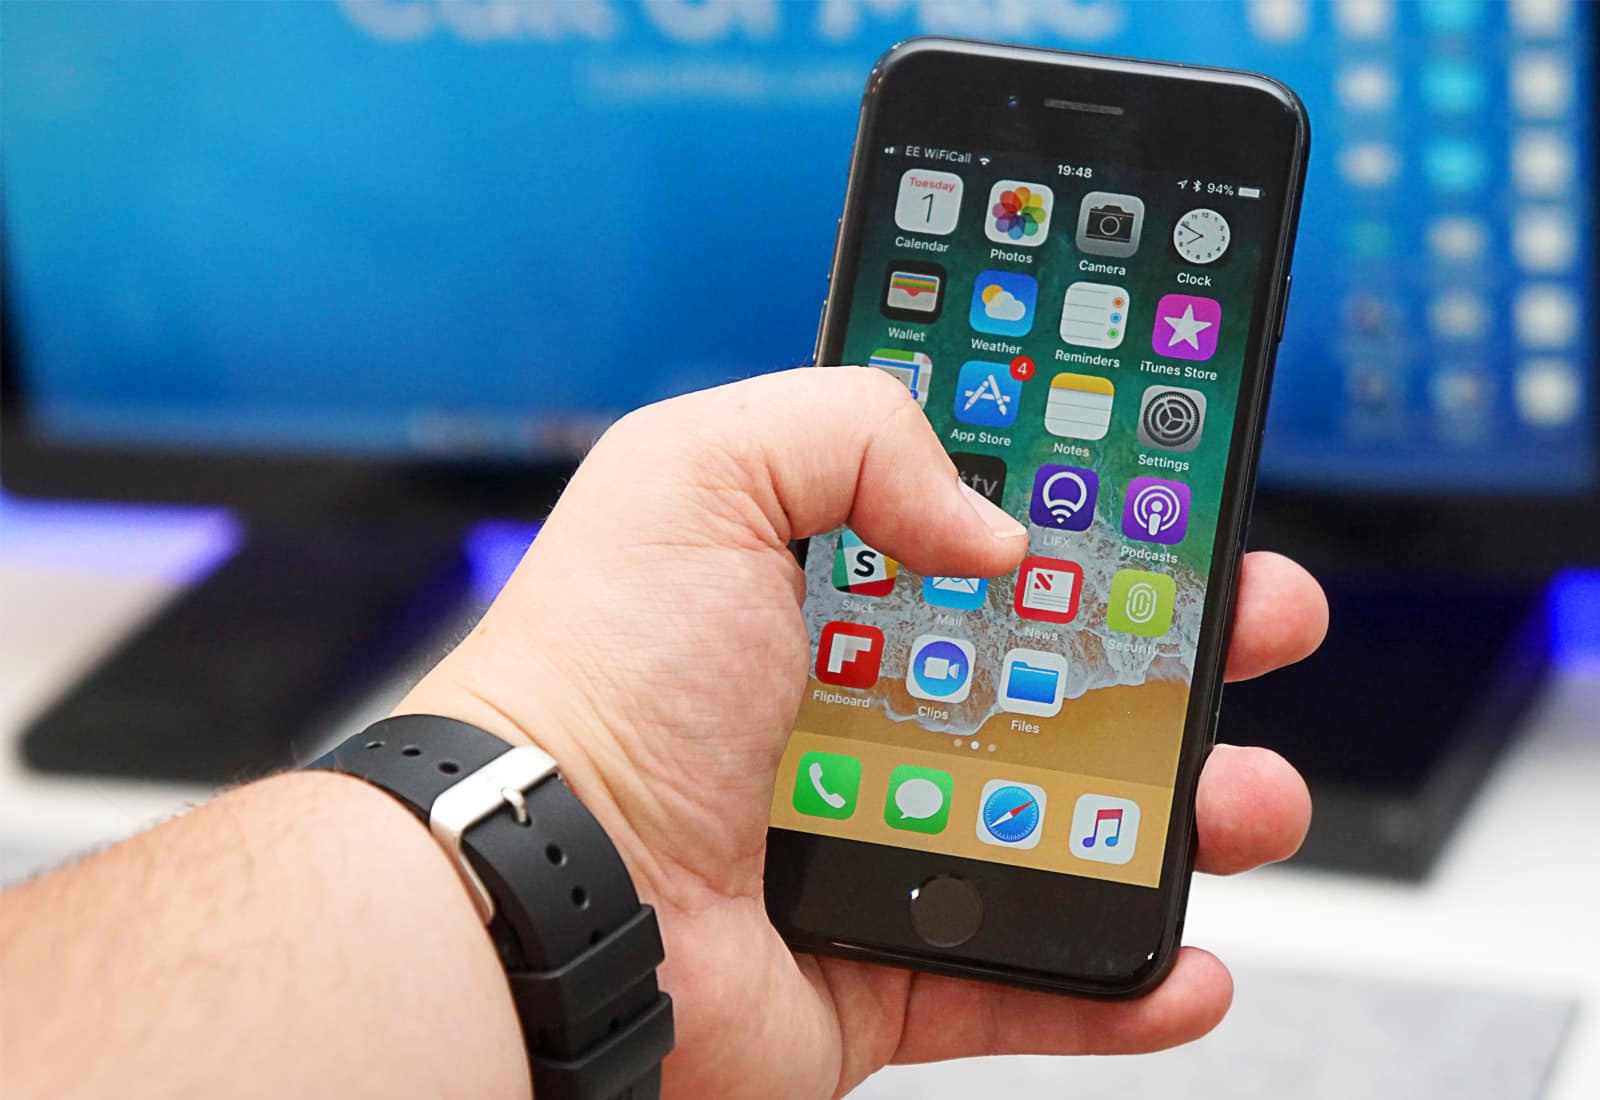 5 tips to fix an unresponsive iPhone screen